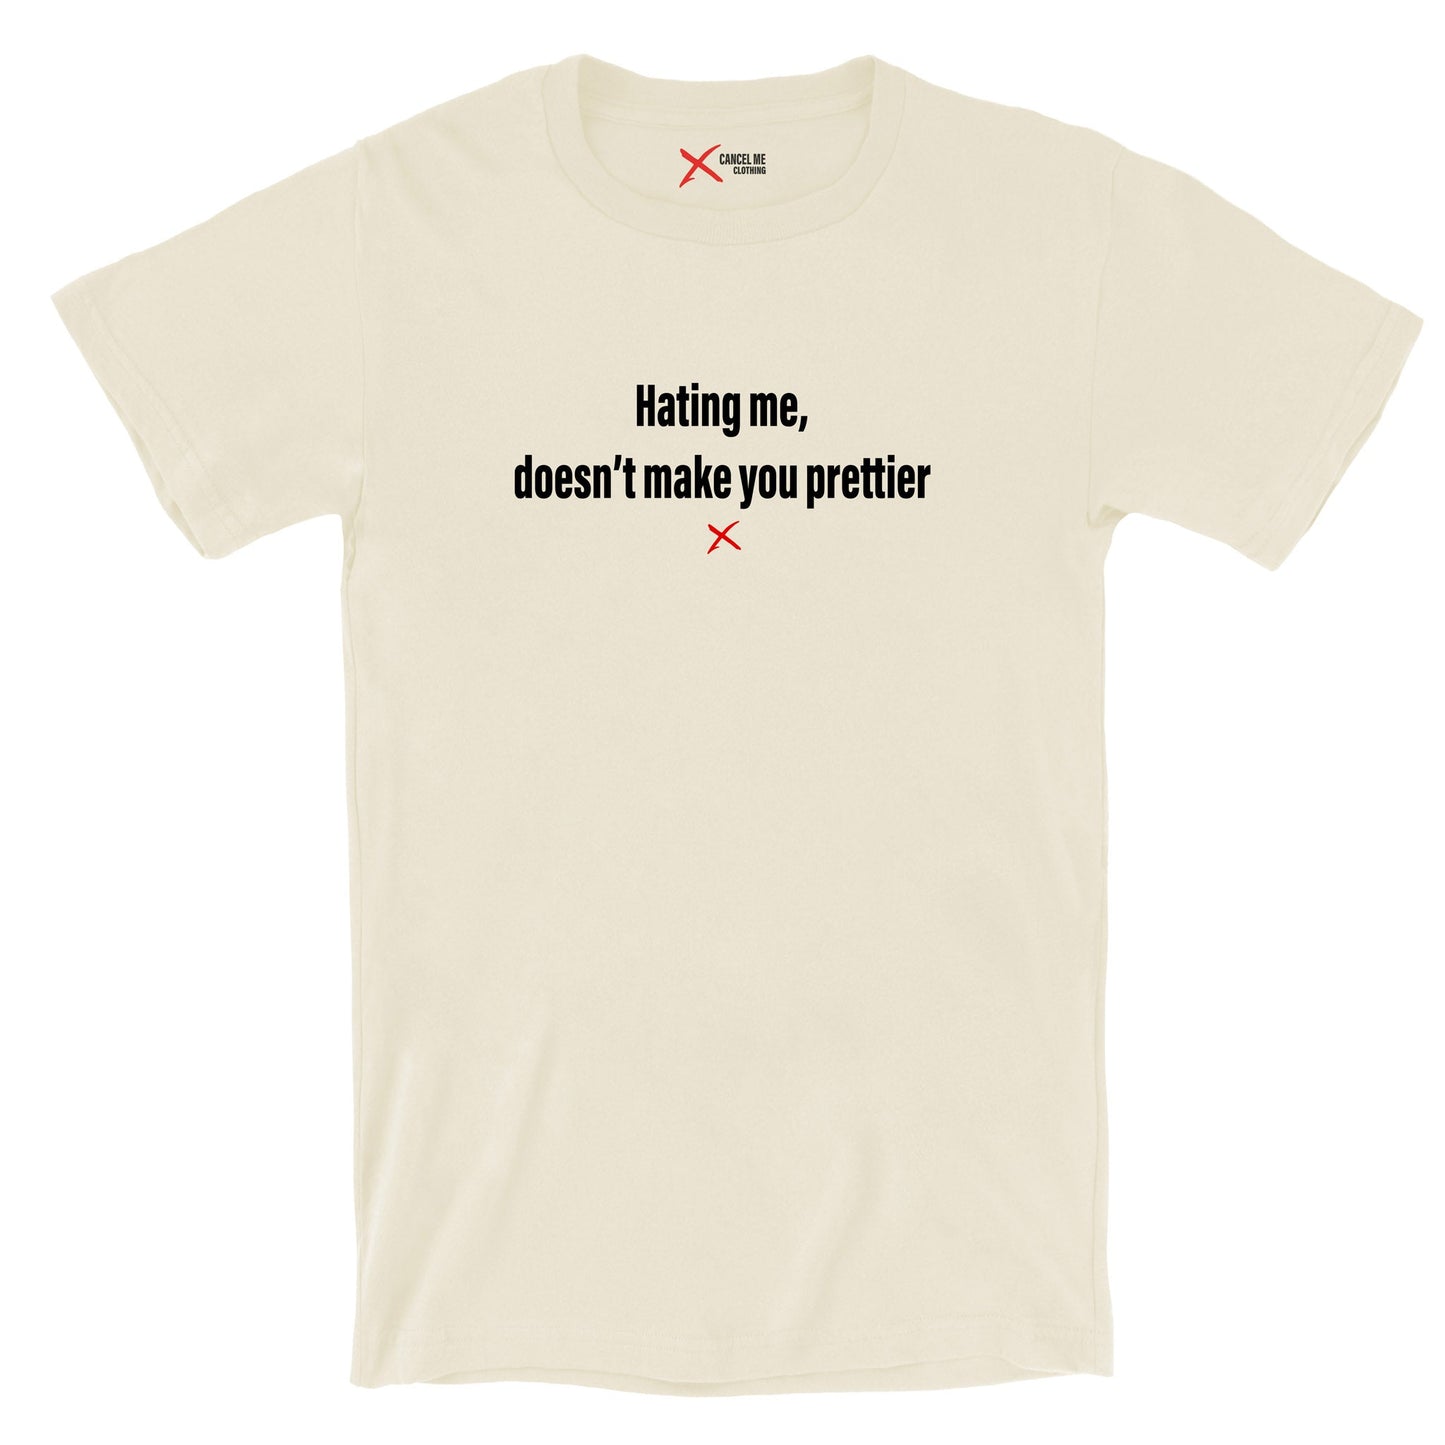 Hating me, doesn't make you prettier - Shirt